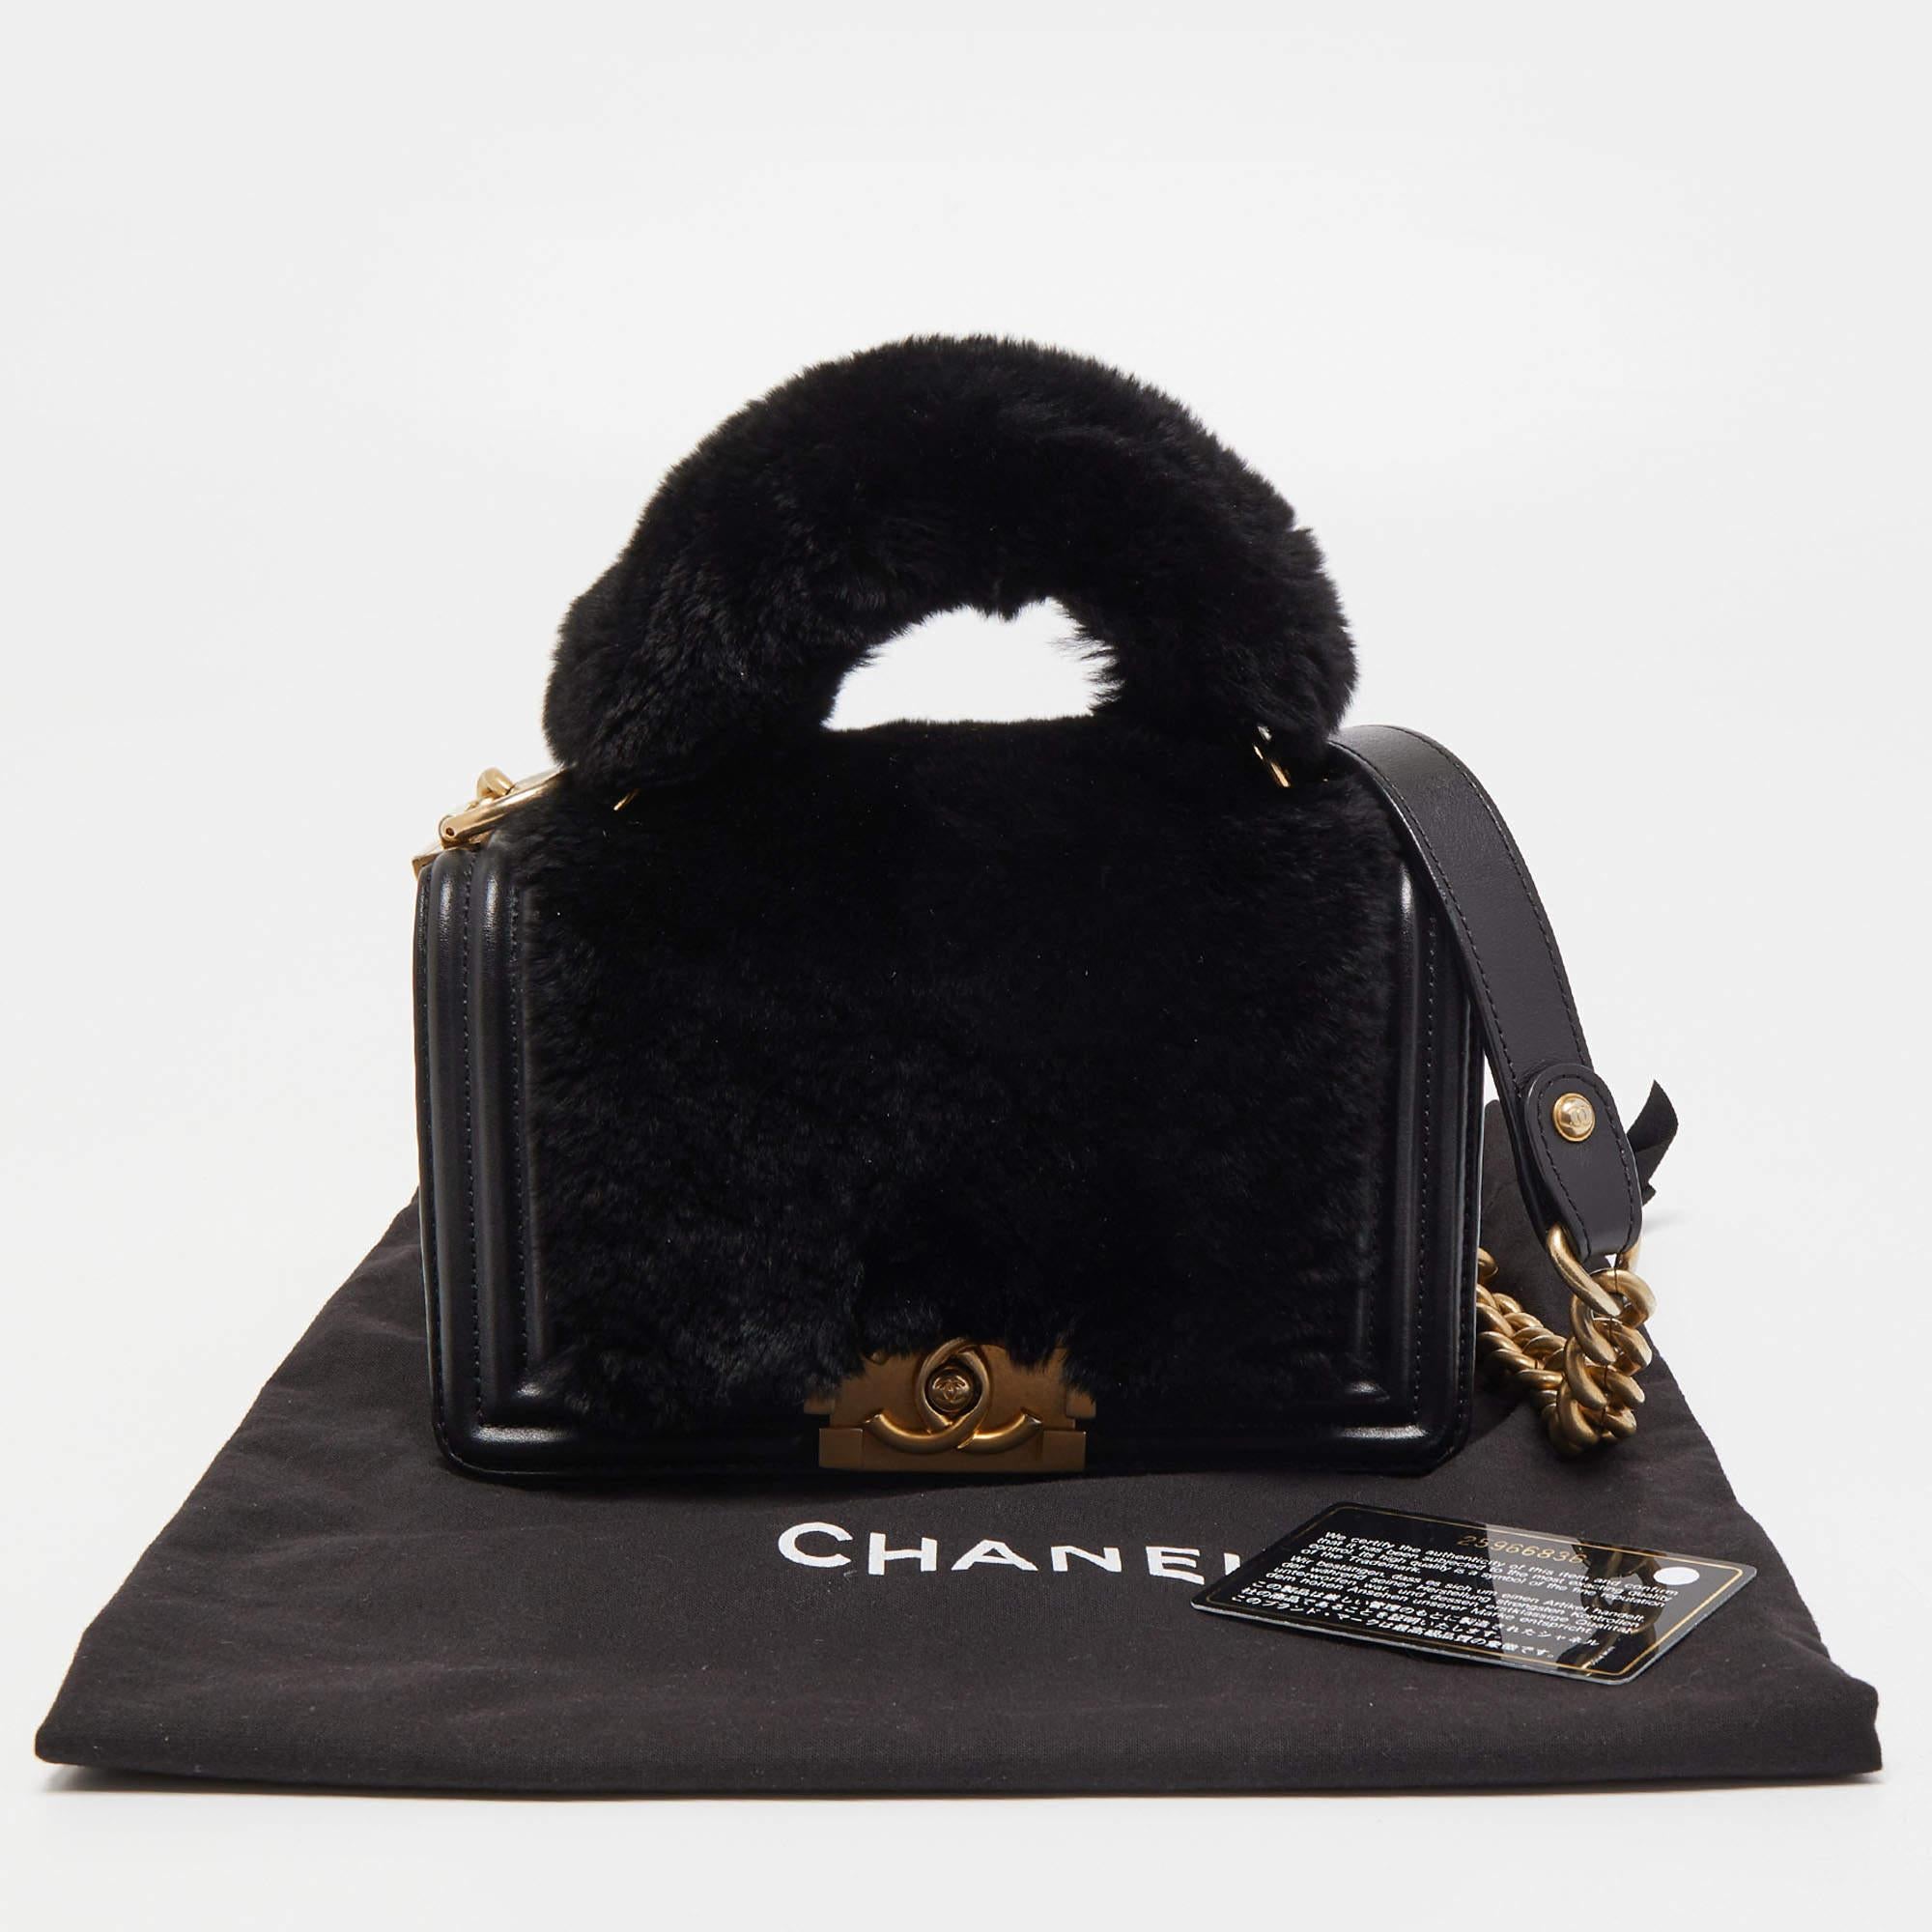 Chanel Black Leather and Rabbit Fur Small Boy Flap Bag 11